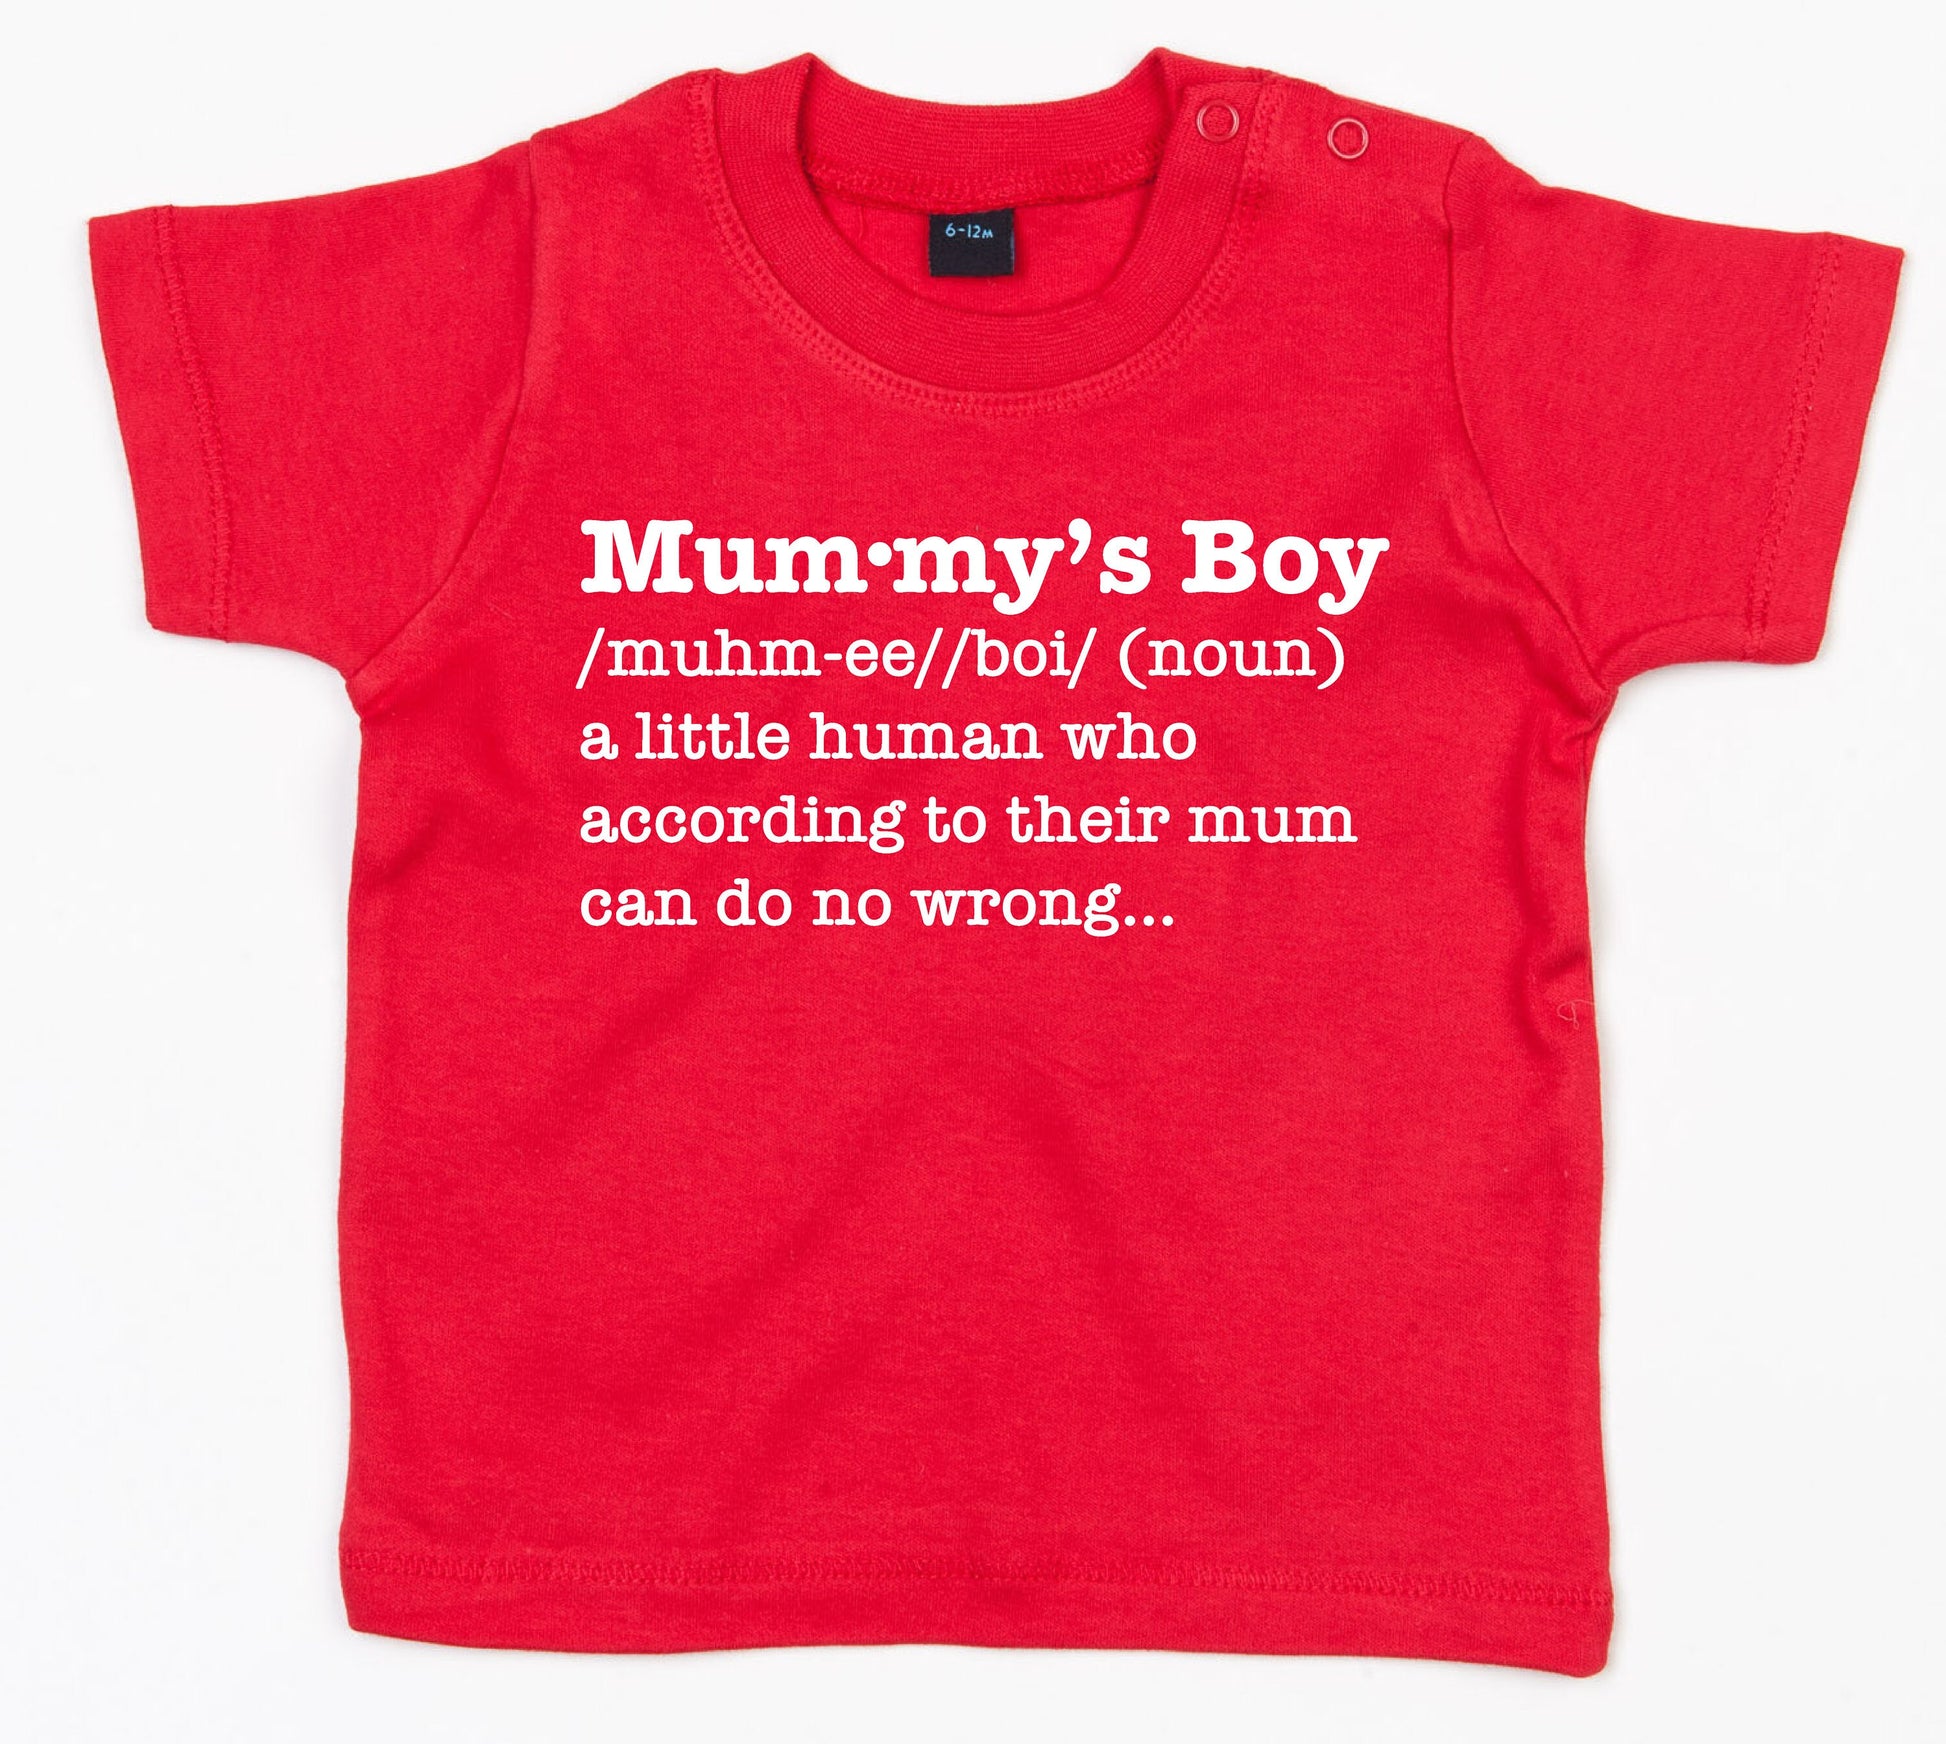 Mummy's Boy Funny Definition T Shirt, Boys Gift, Funny kids tee, cute toddler shirt, one two year old cute kids clothes, sibling t-shirt